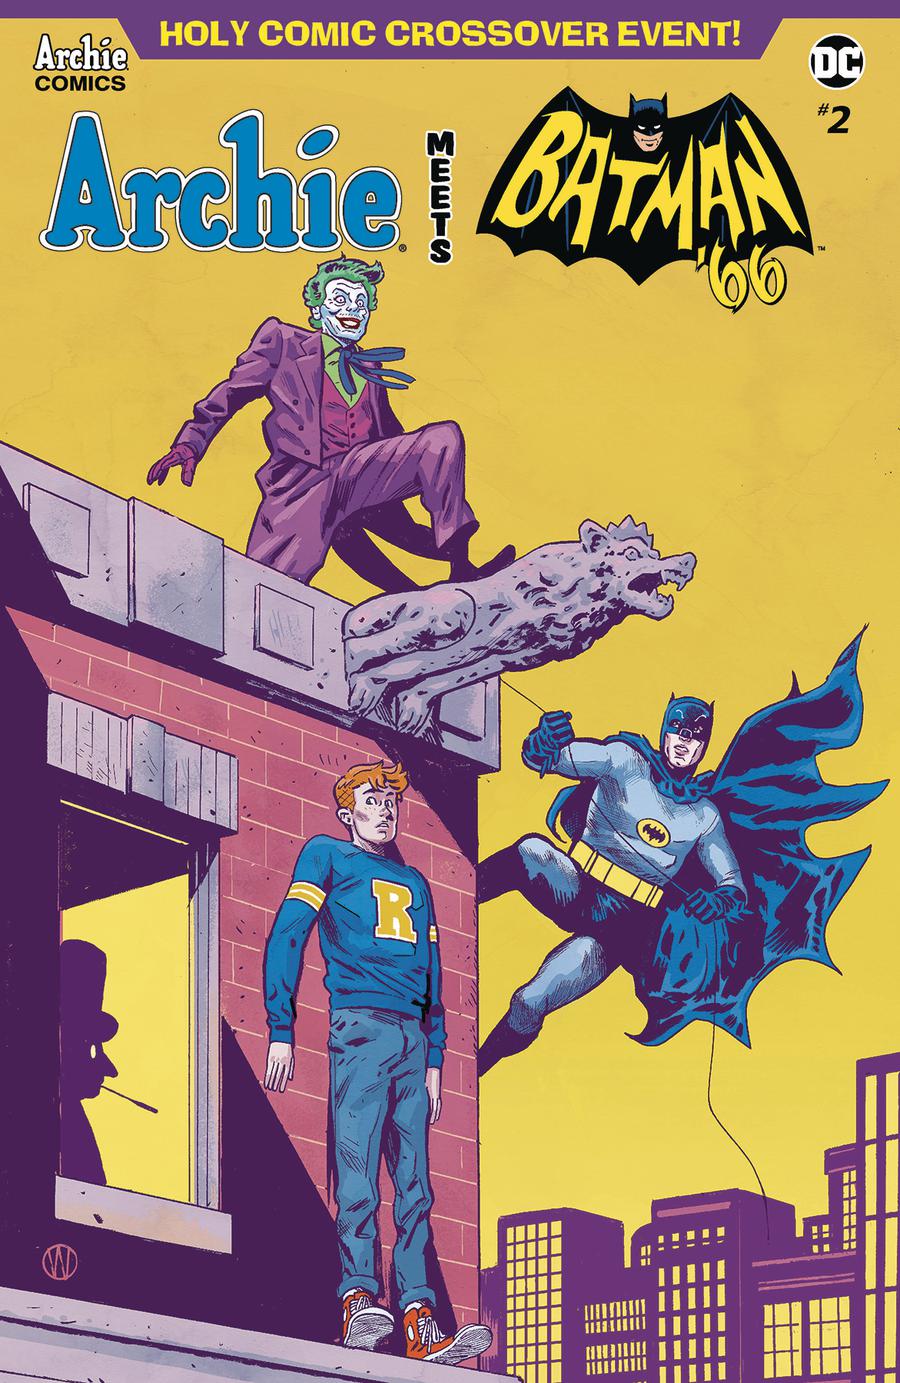 Archie Meets Batman 66 #2 Cover F Variant Michael Walsh Cover